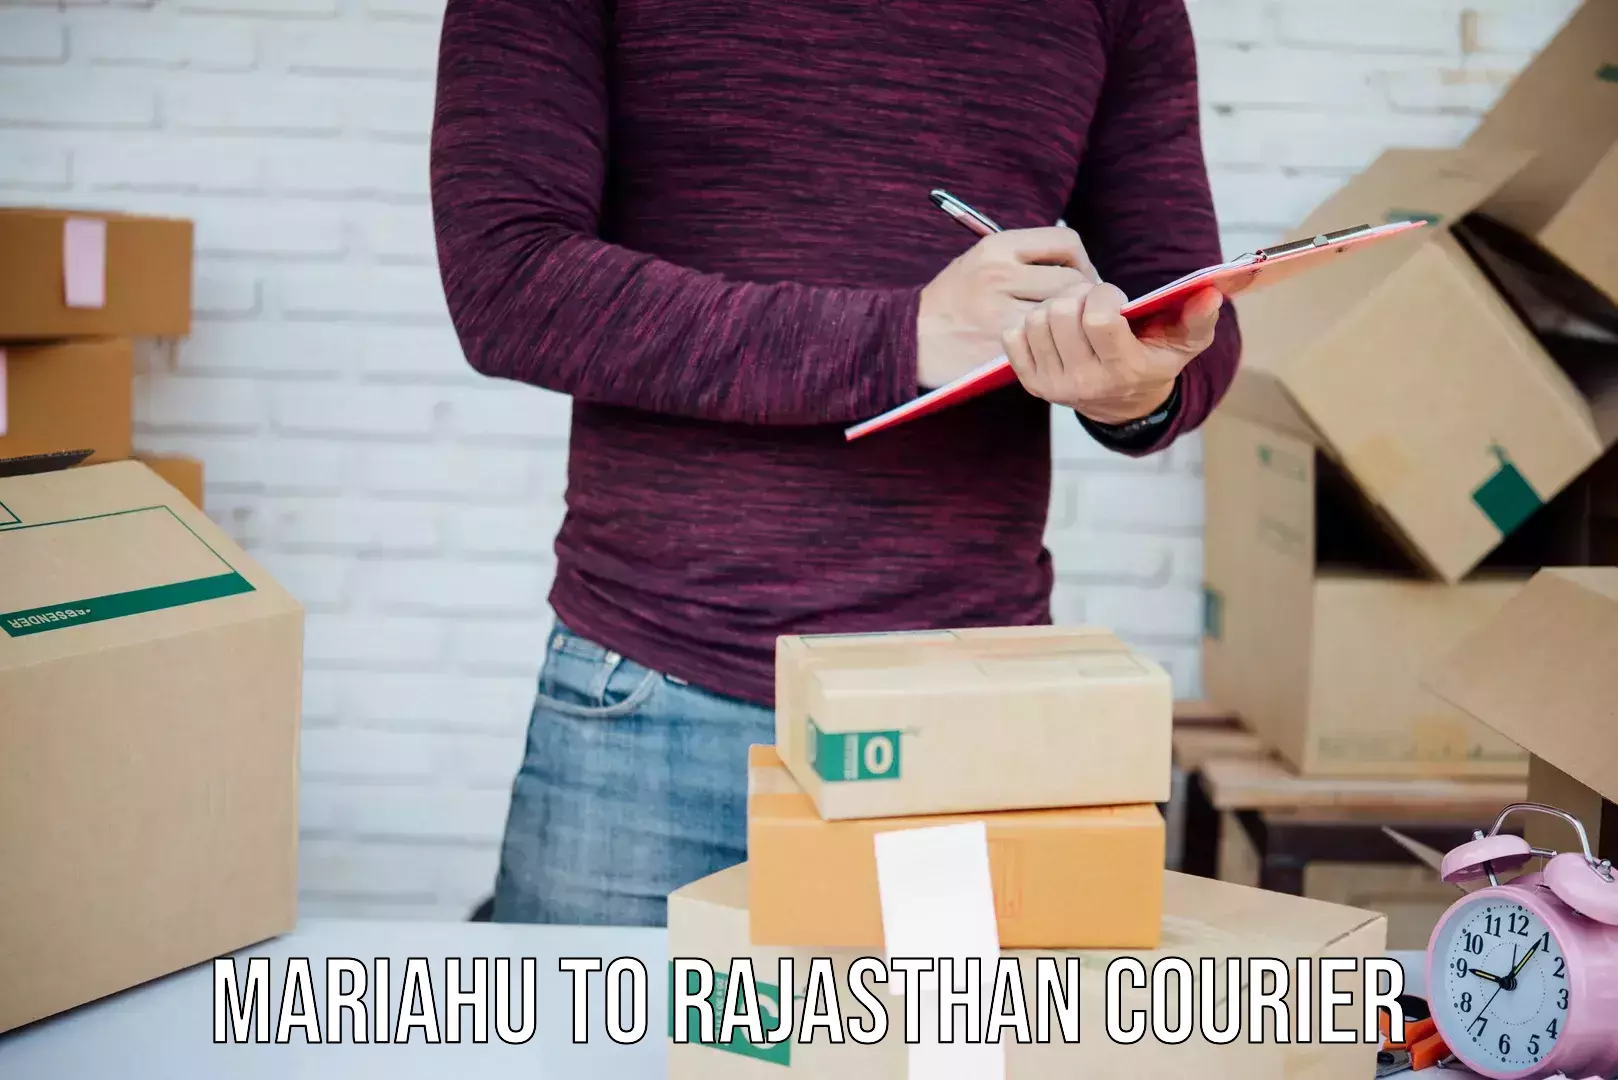 Reliable courier service Mariahu to Mathania